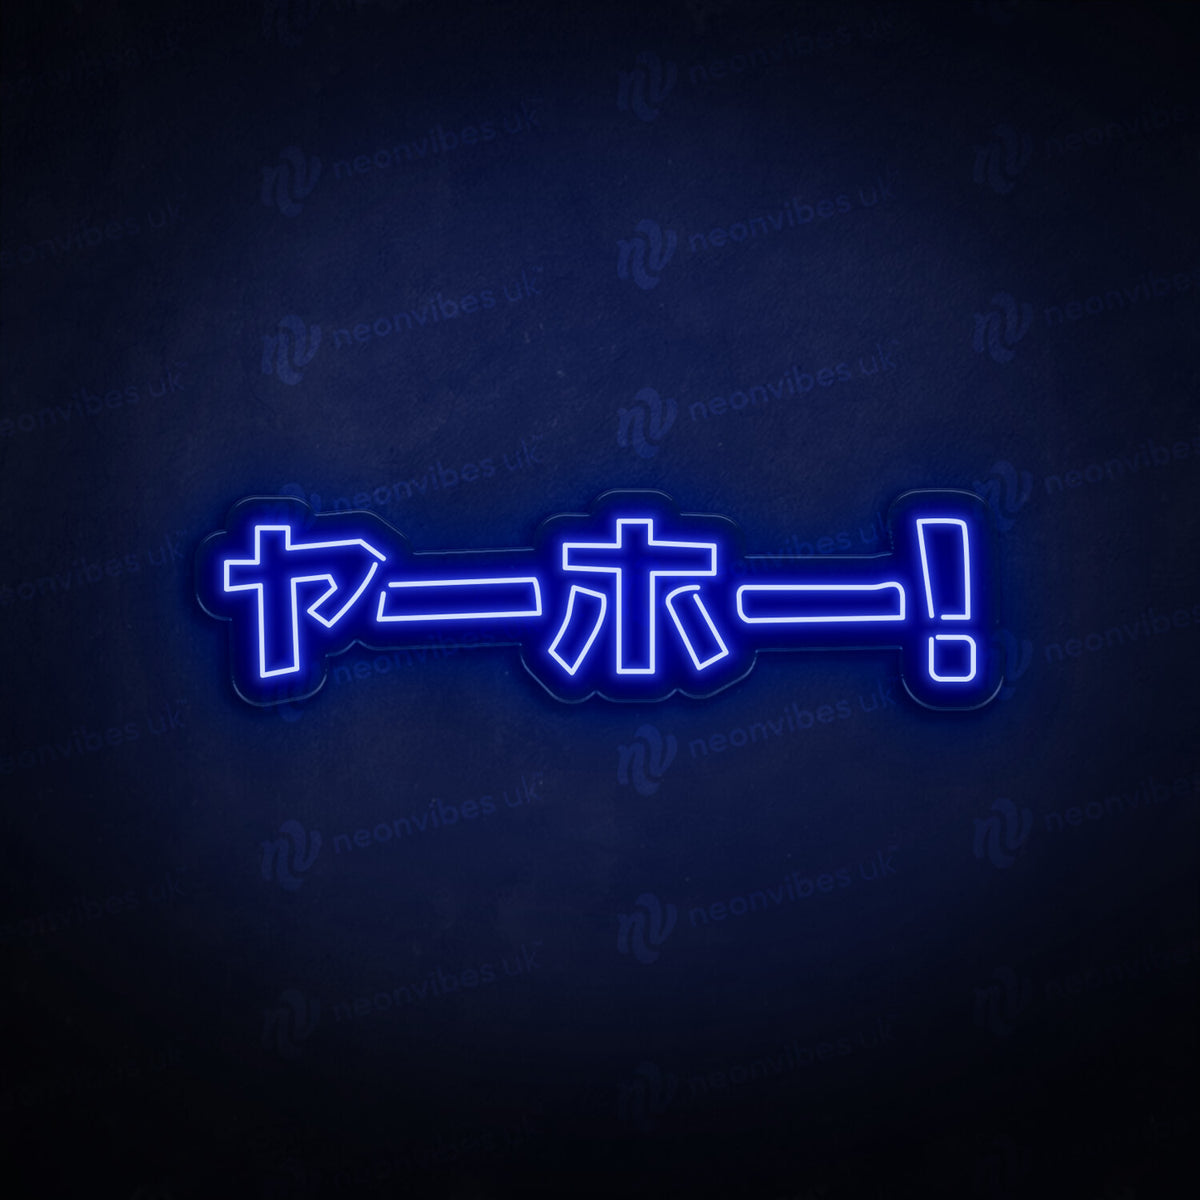 Japanese Yaho neon sign